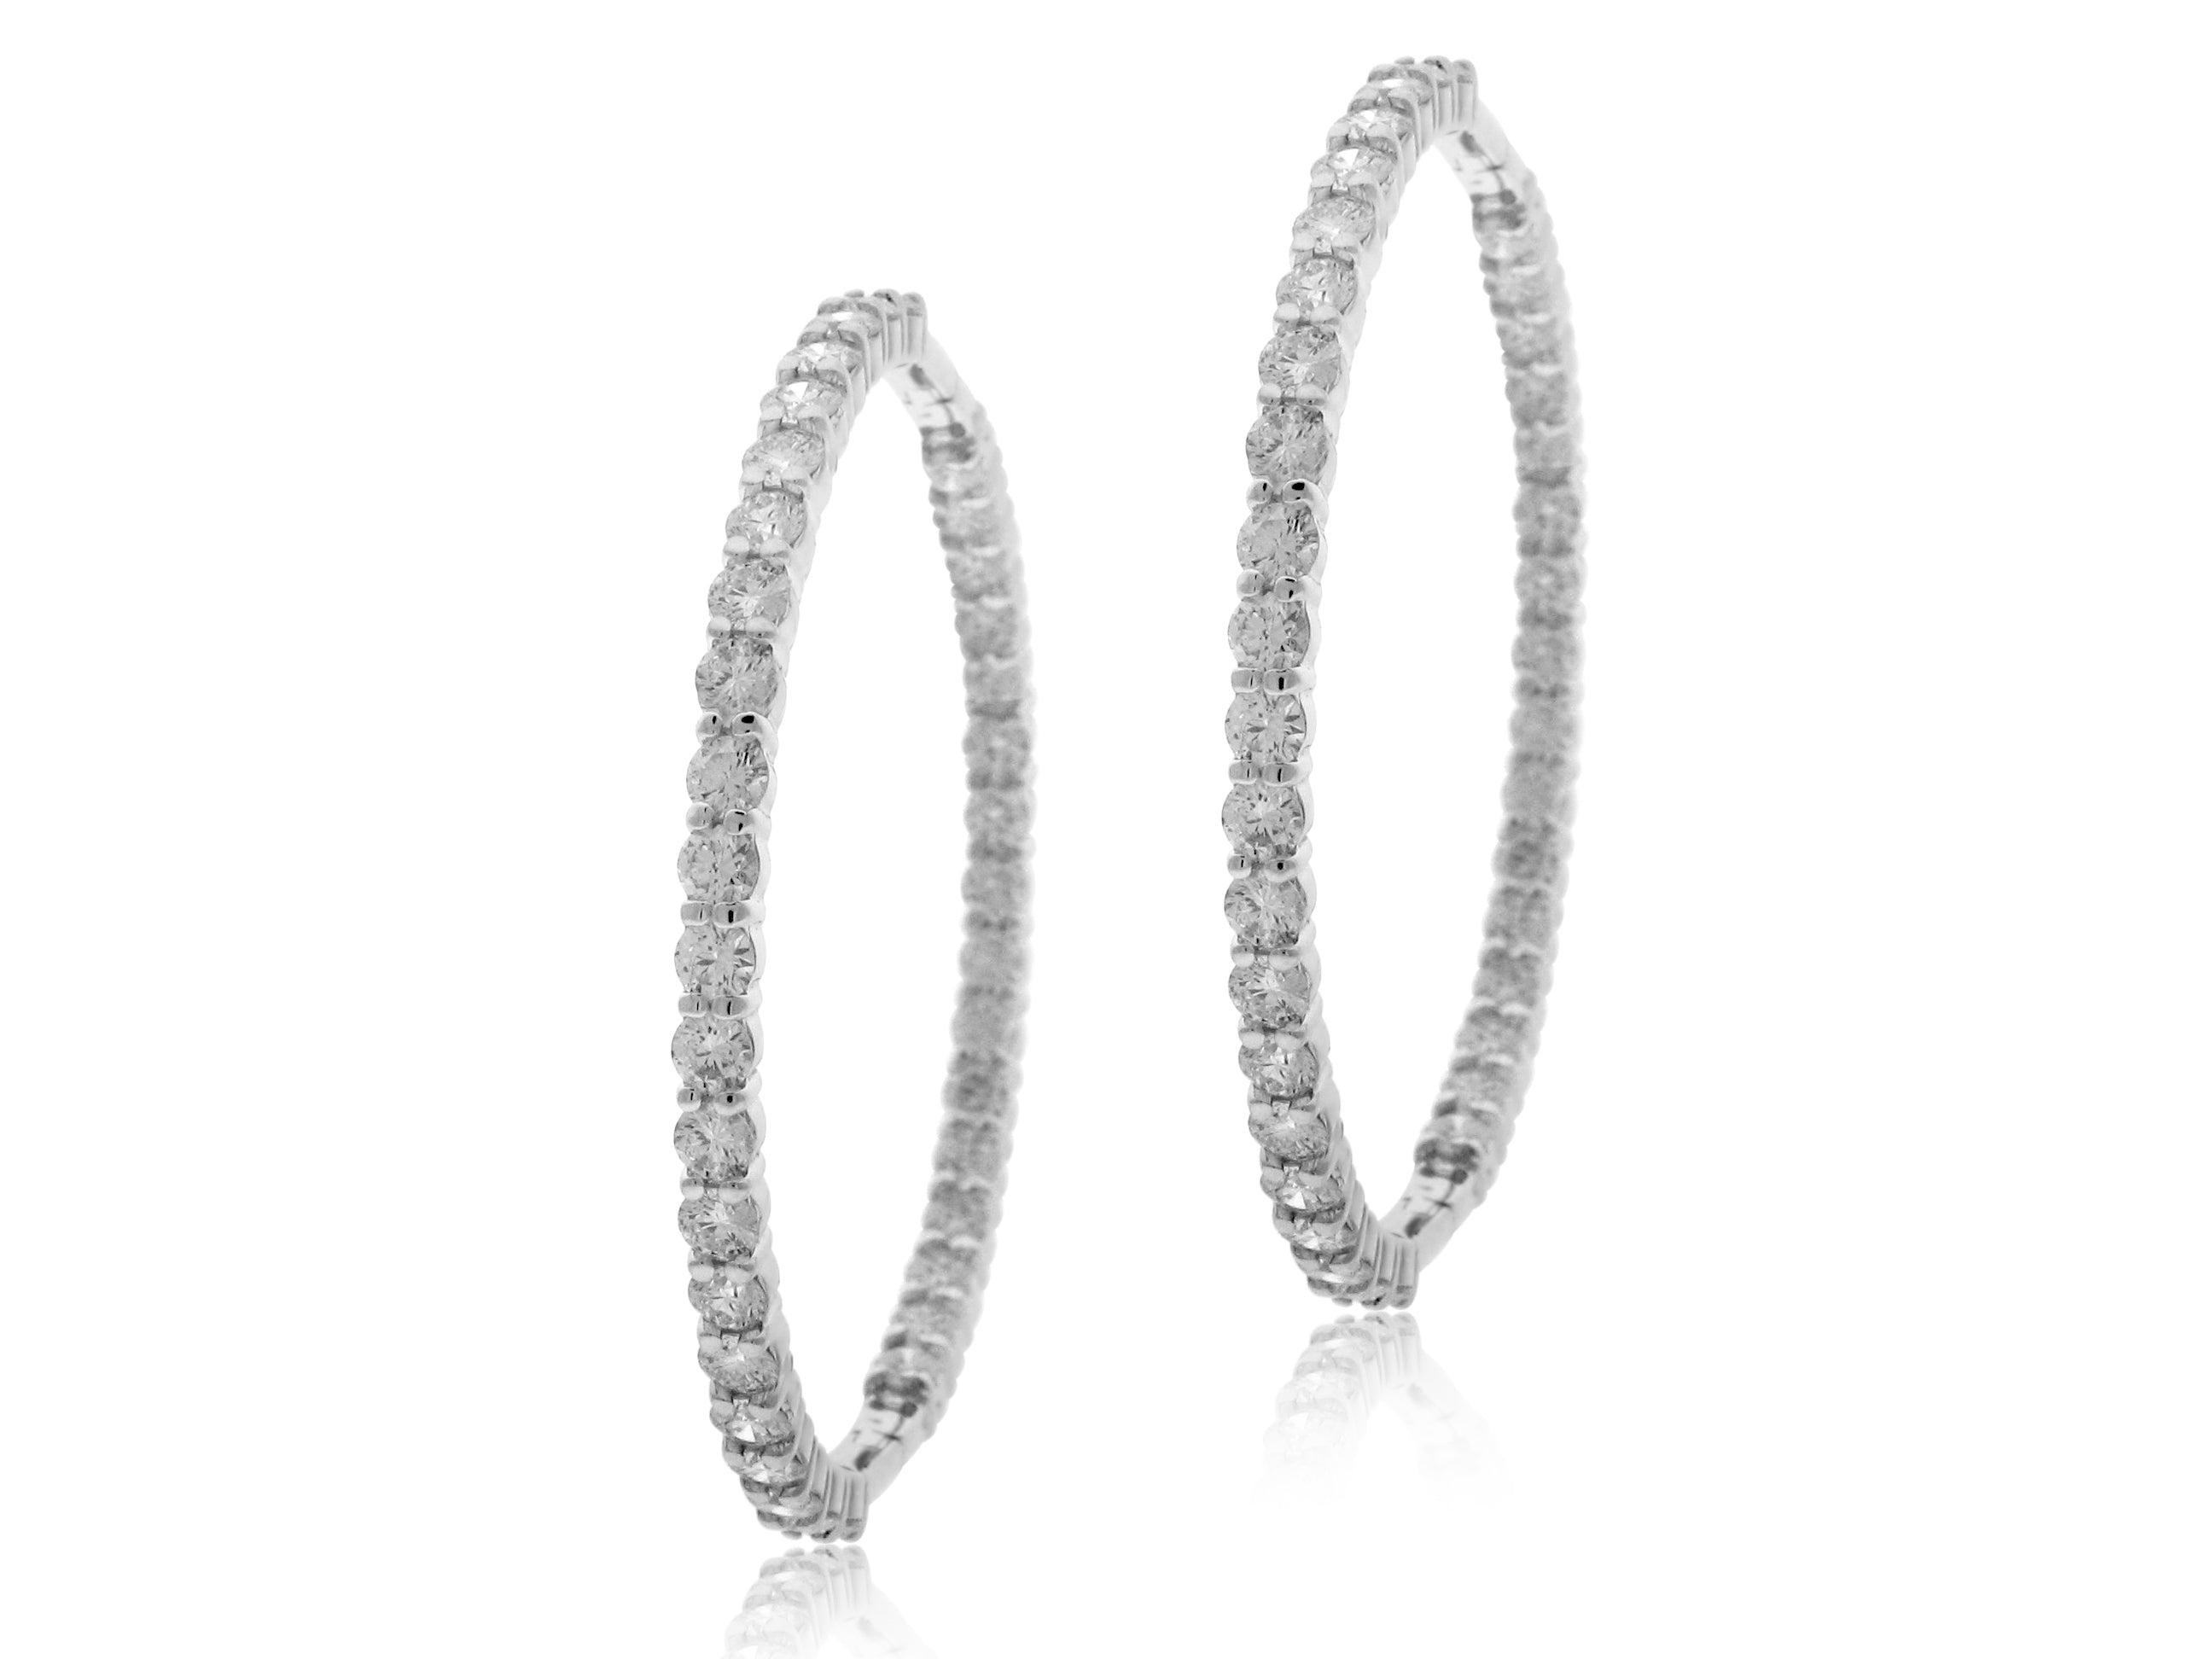 ROBERTO COIN 18K WHITE GOLD 7.55CT DIAMOND INSIDE OUT HOOP EARRINGS FROM THE DIAMOND COLLECTION